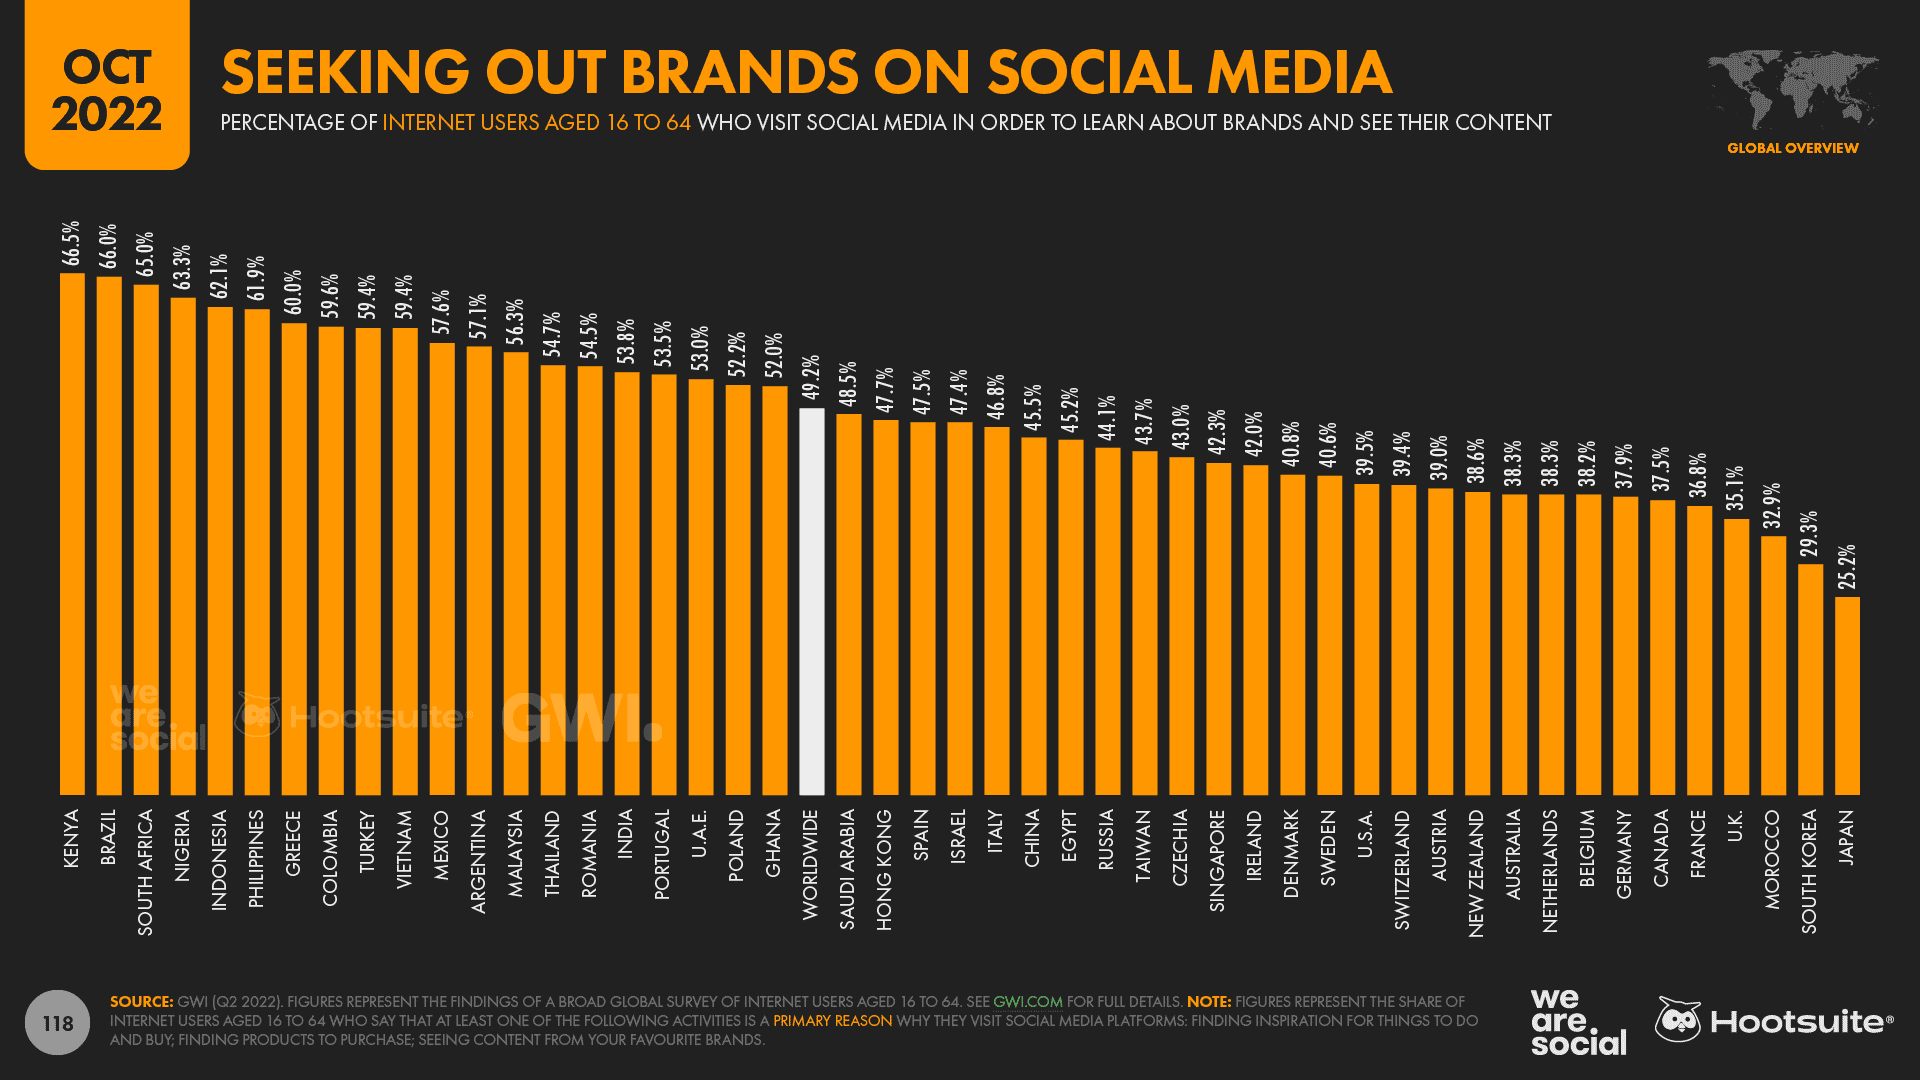 Chart showing seeking out new behaviors on social media